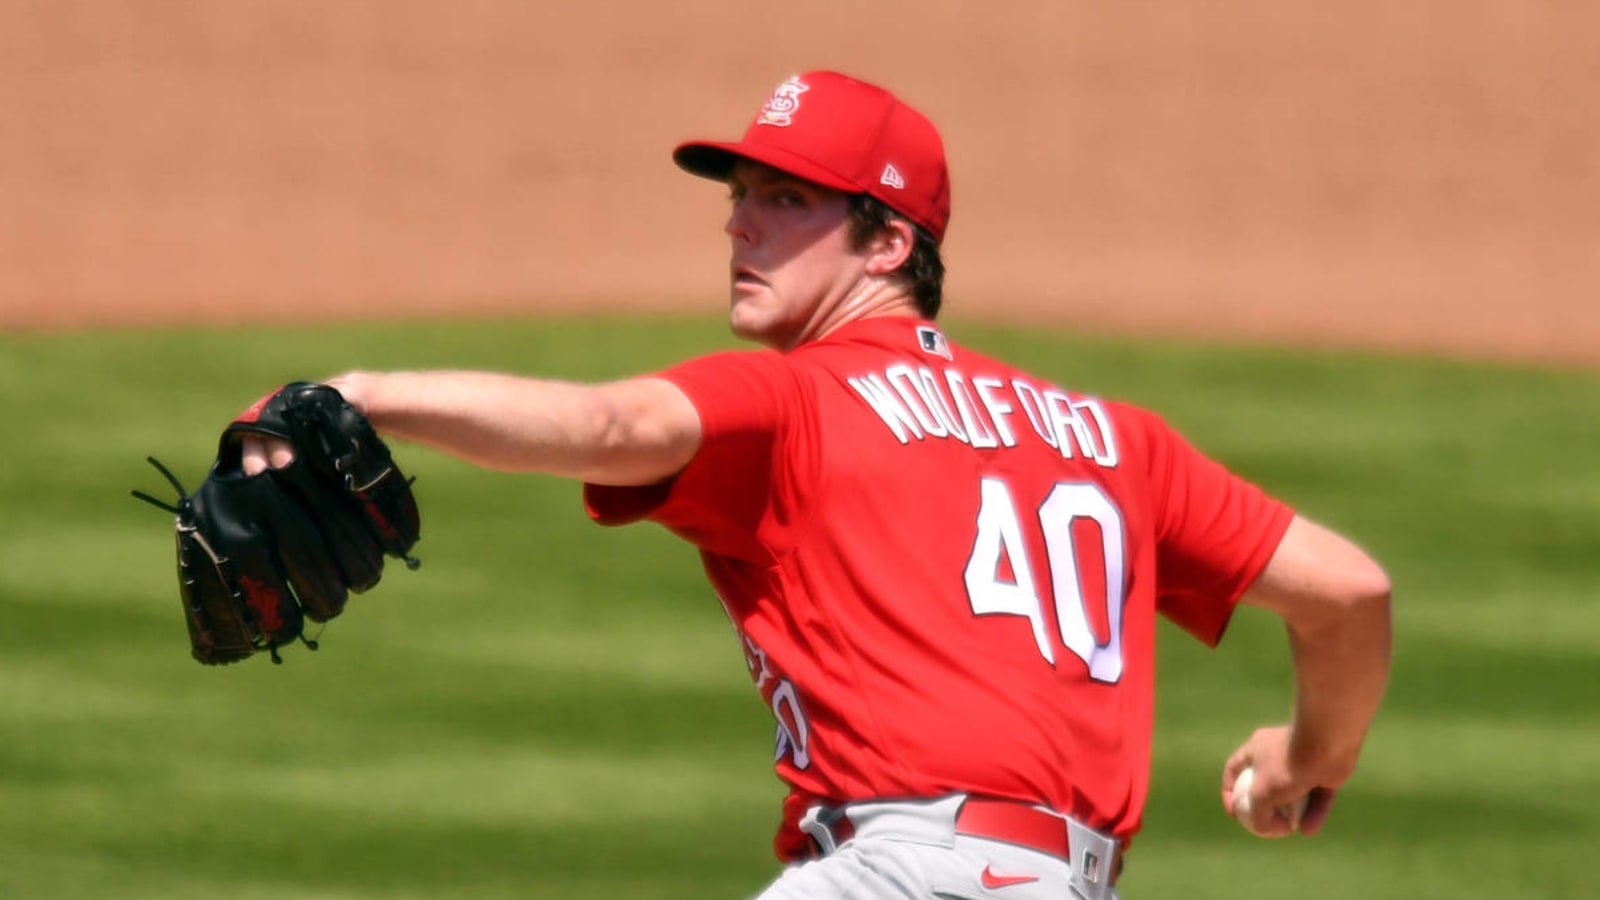 Cardinals finalize Opening Day roster